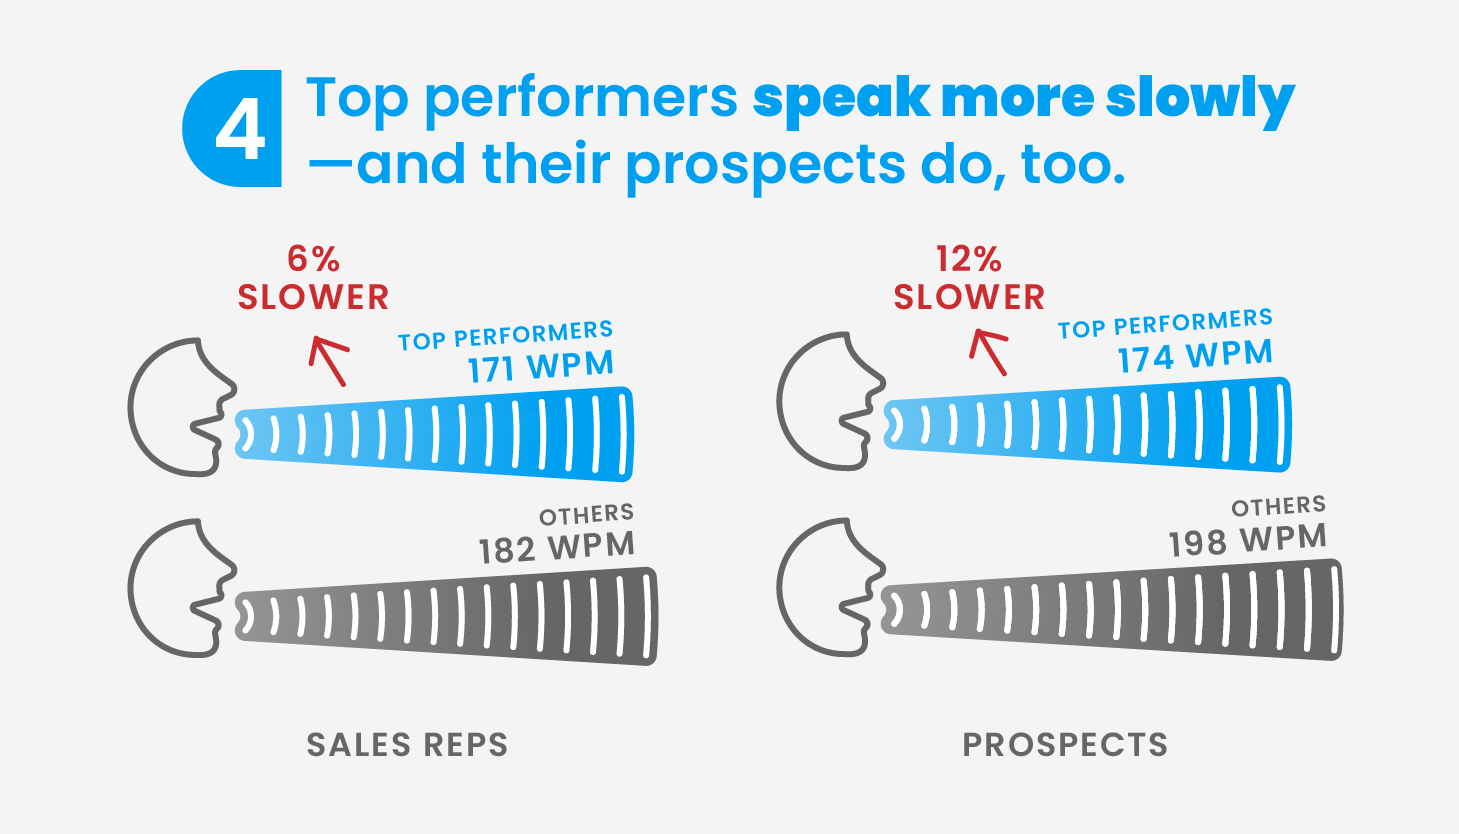 4. Top performers speak more slowly–and their prospects do, too.